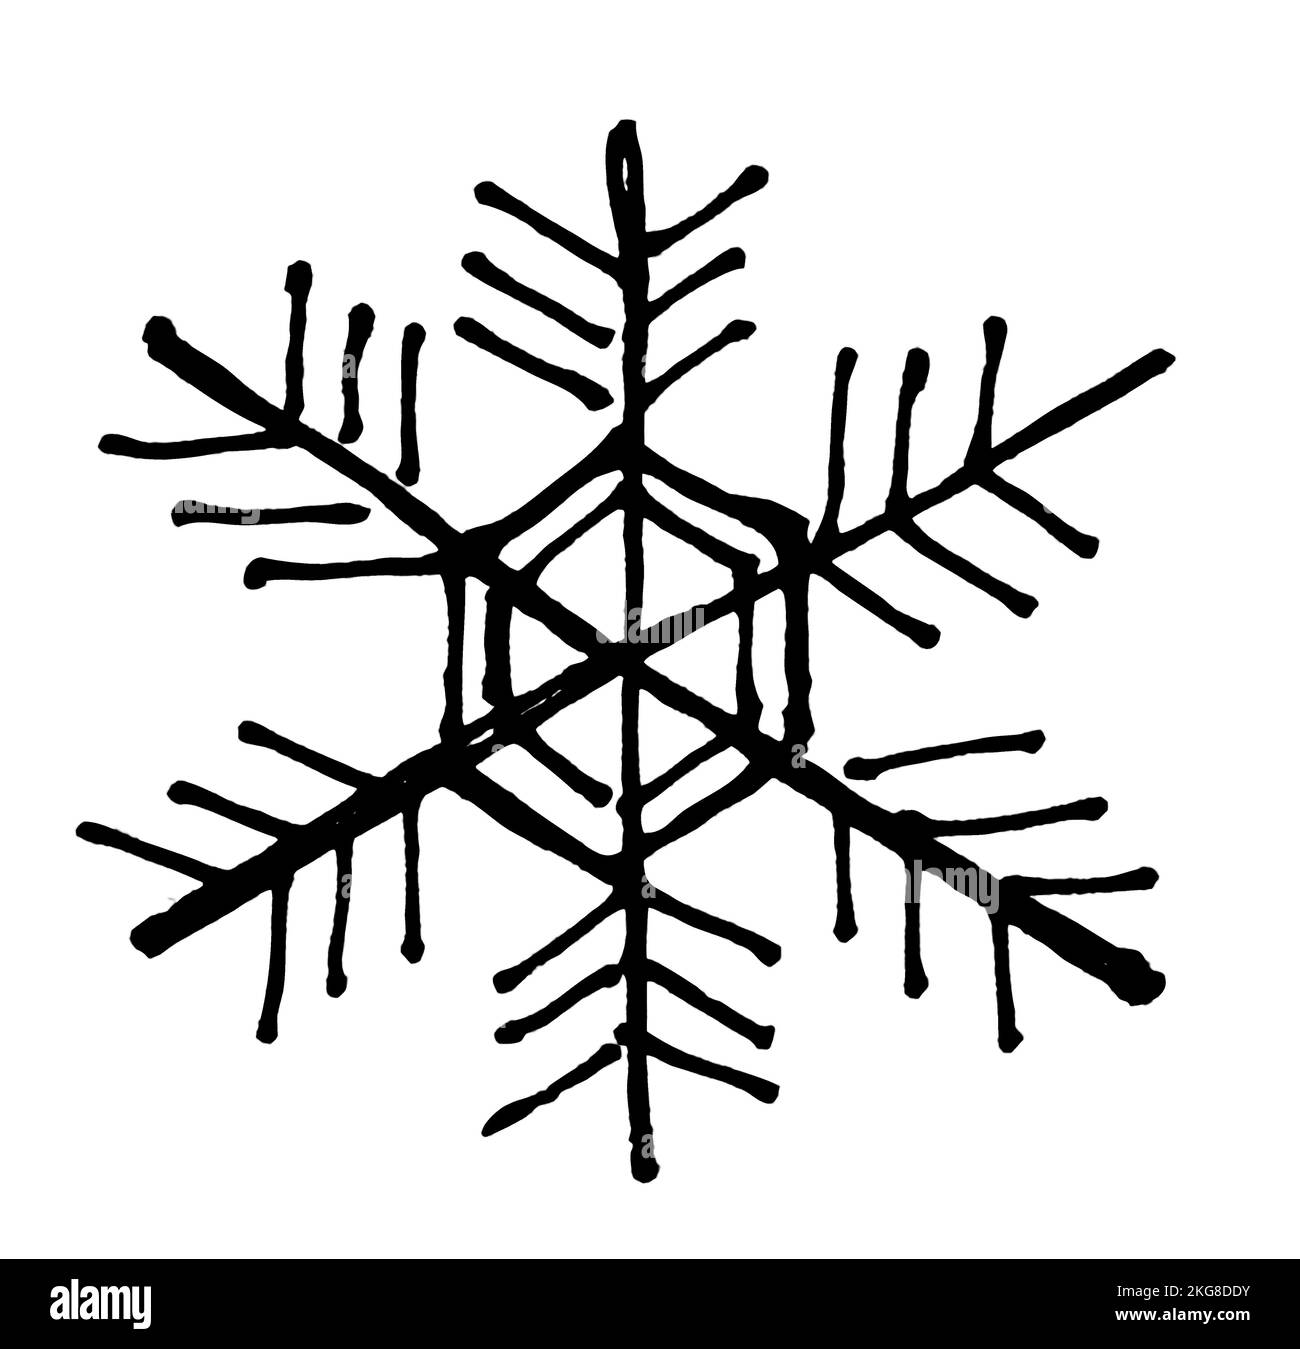 Ice crystals icon freehand drawn Stock Vector